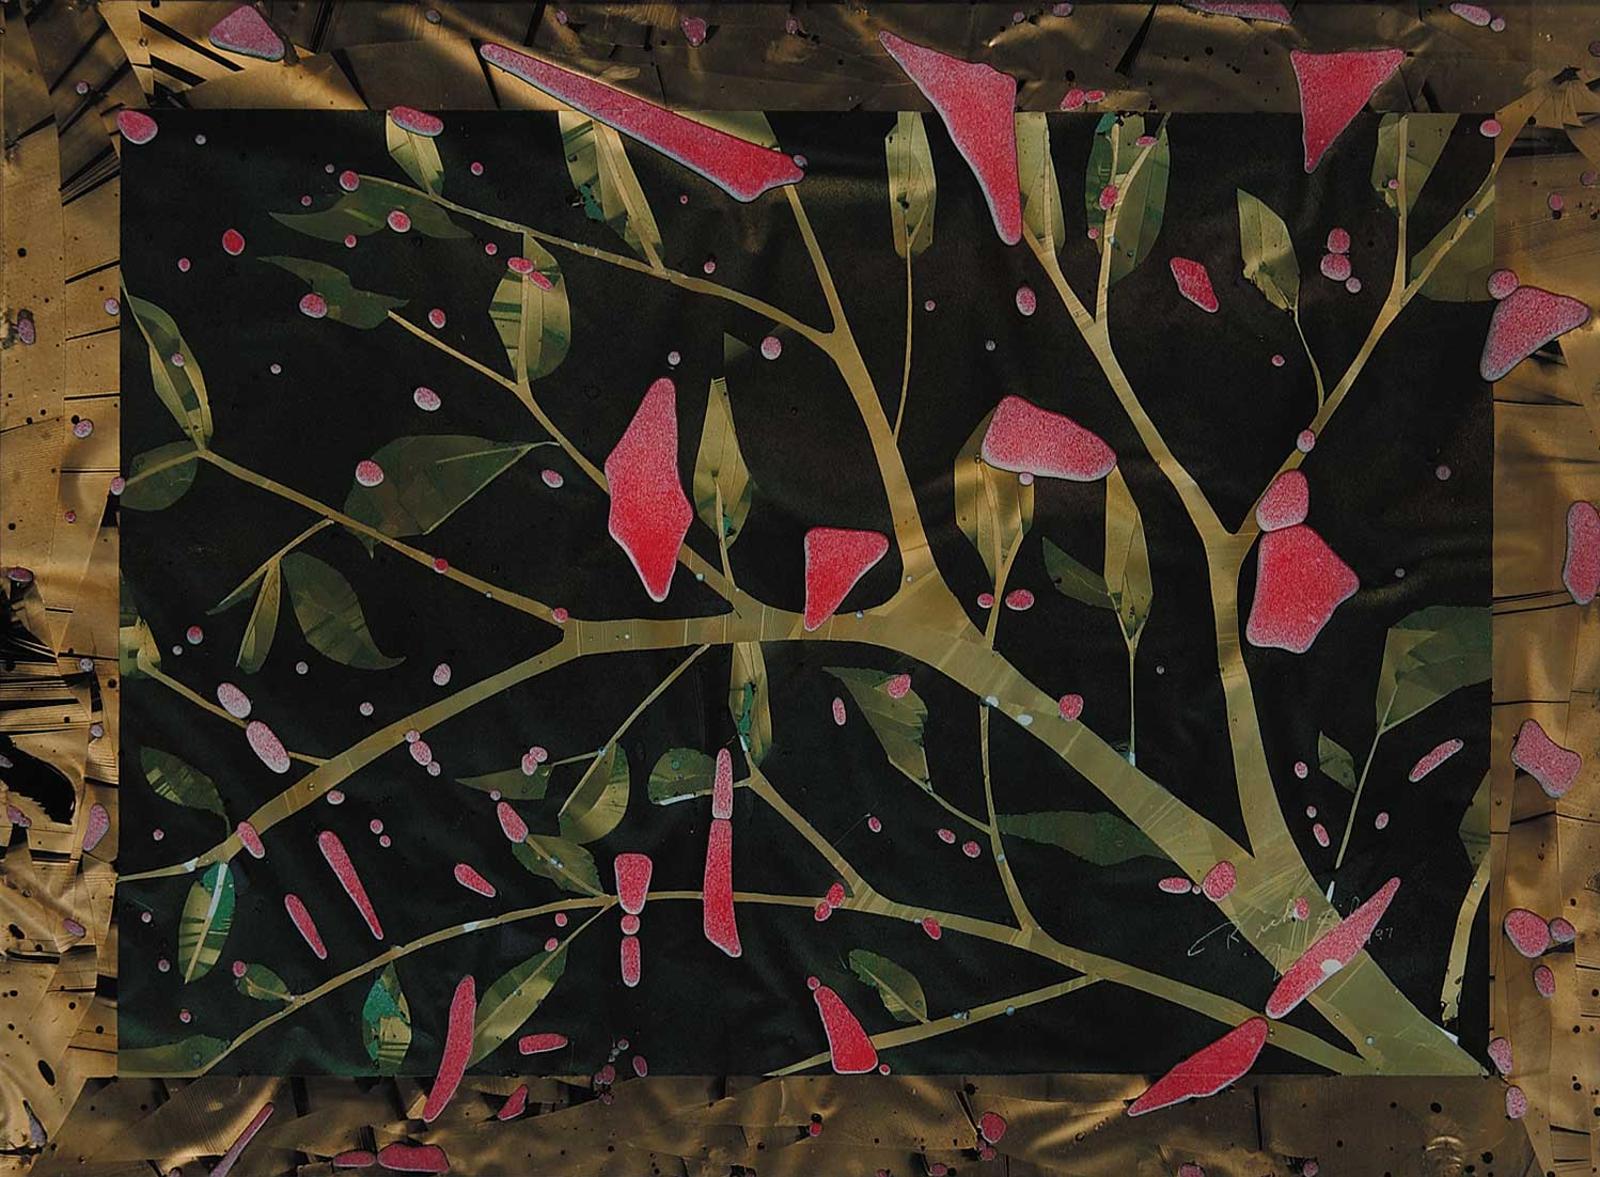 Rick L. Silas - Untitled - Branch with Pink Leaves